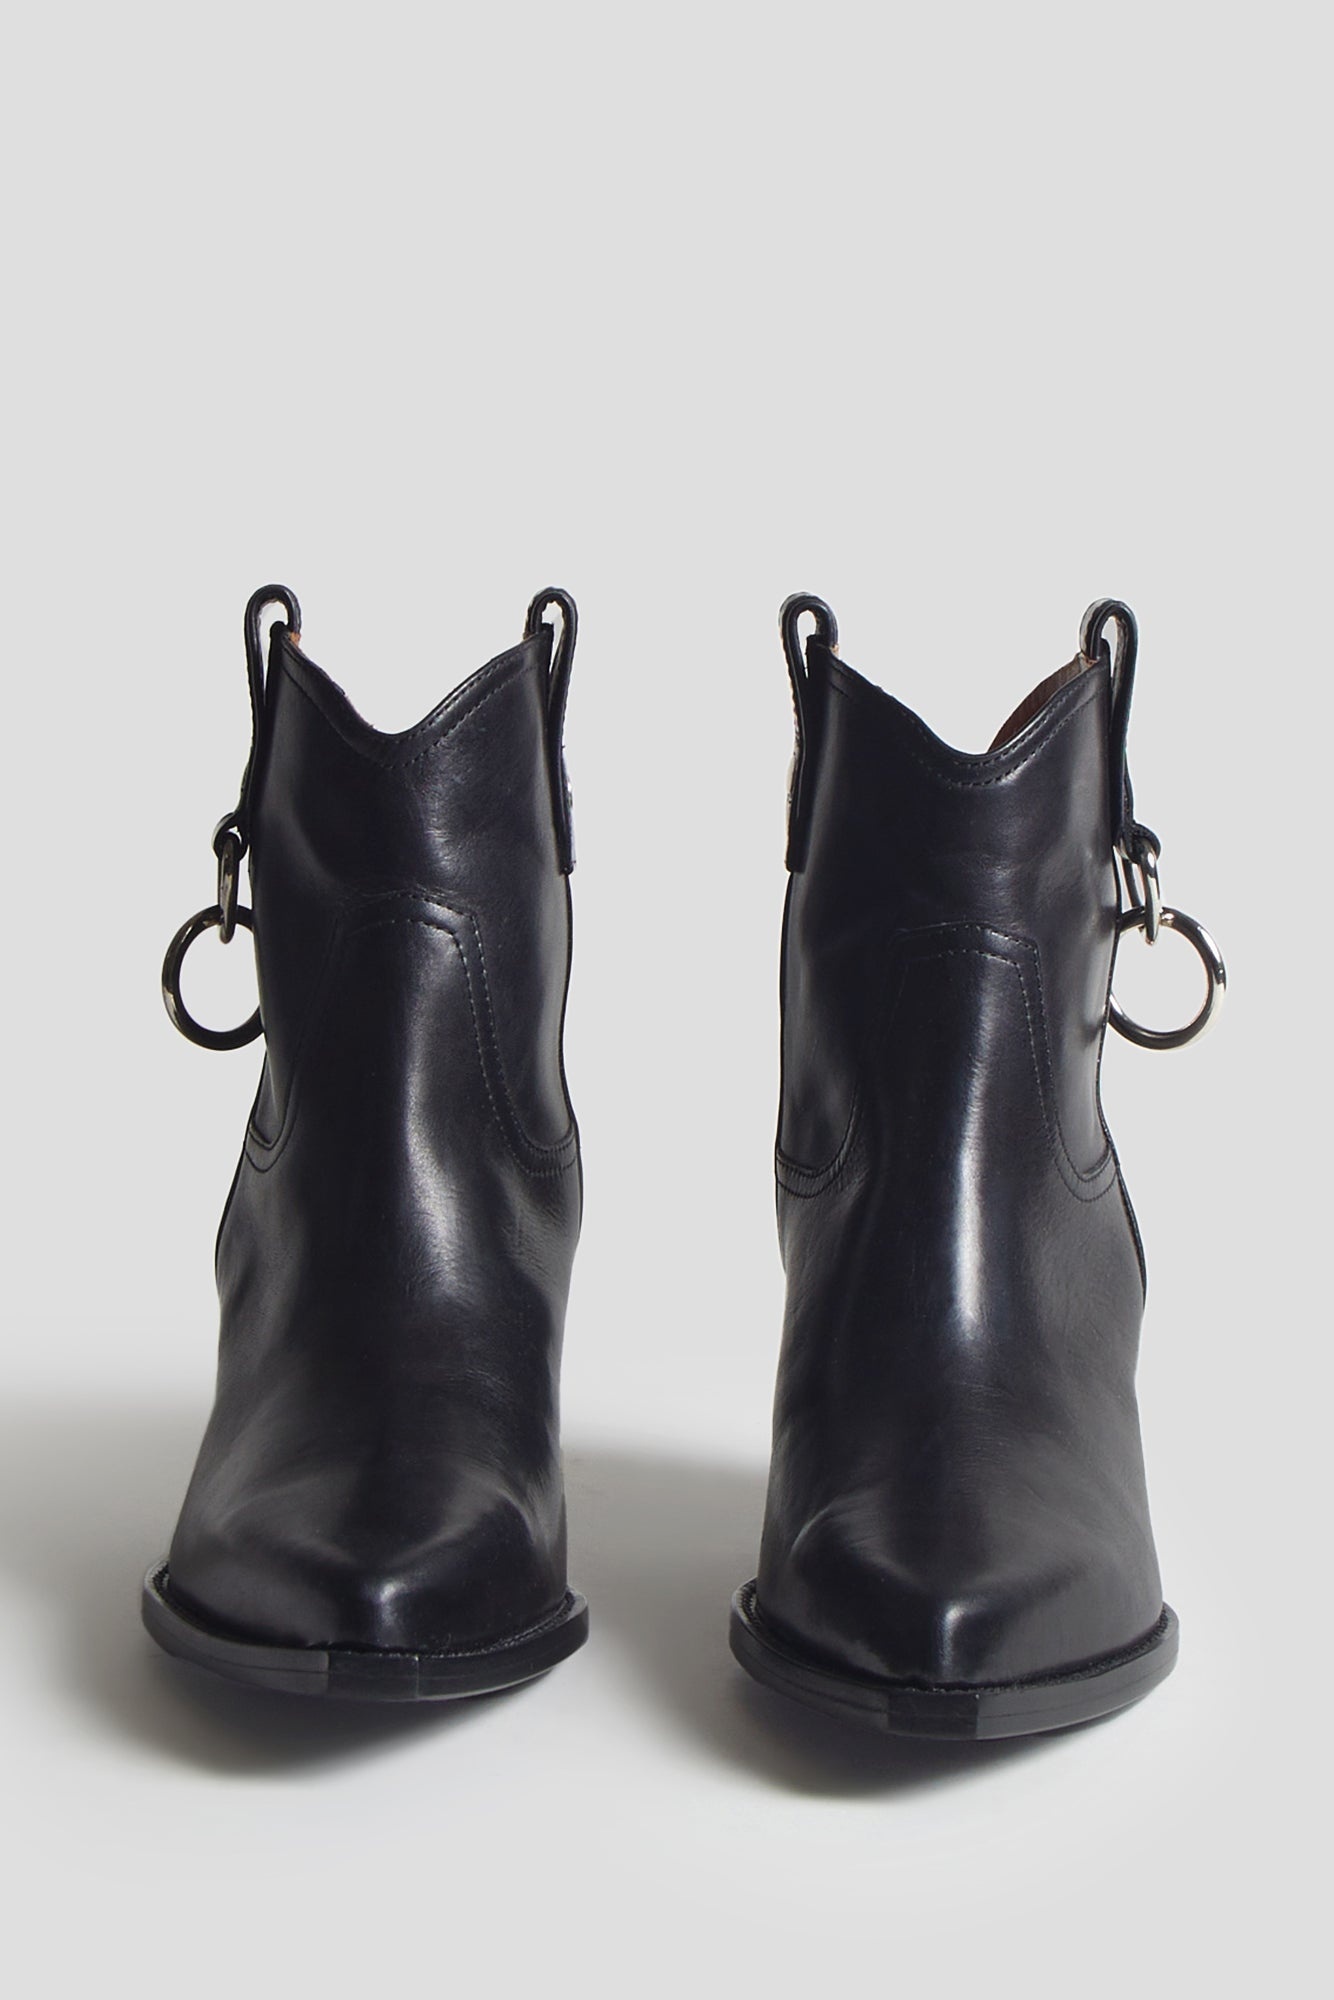 RINGED ANKLE COWBOY BOOT - BLACK - 2